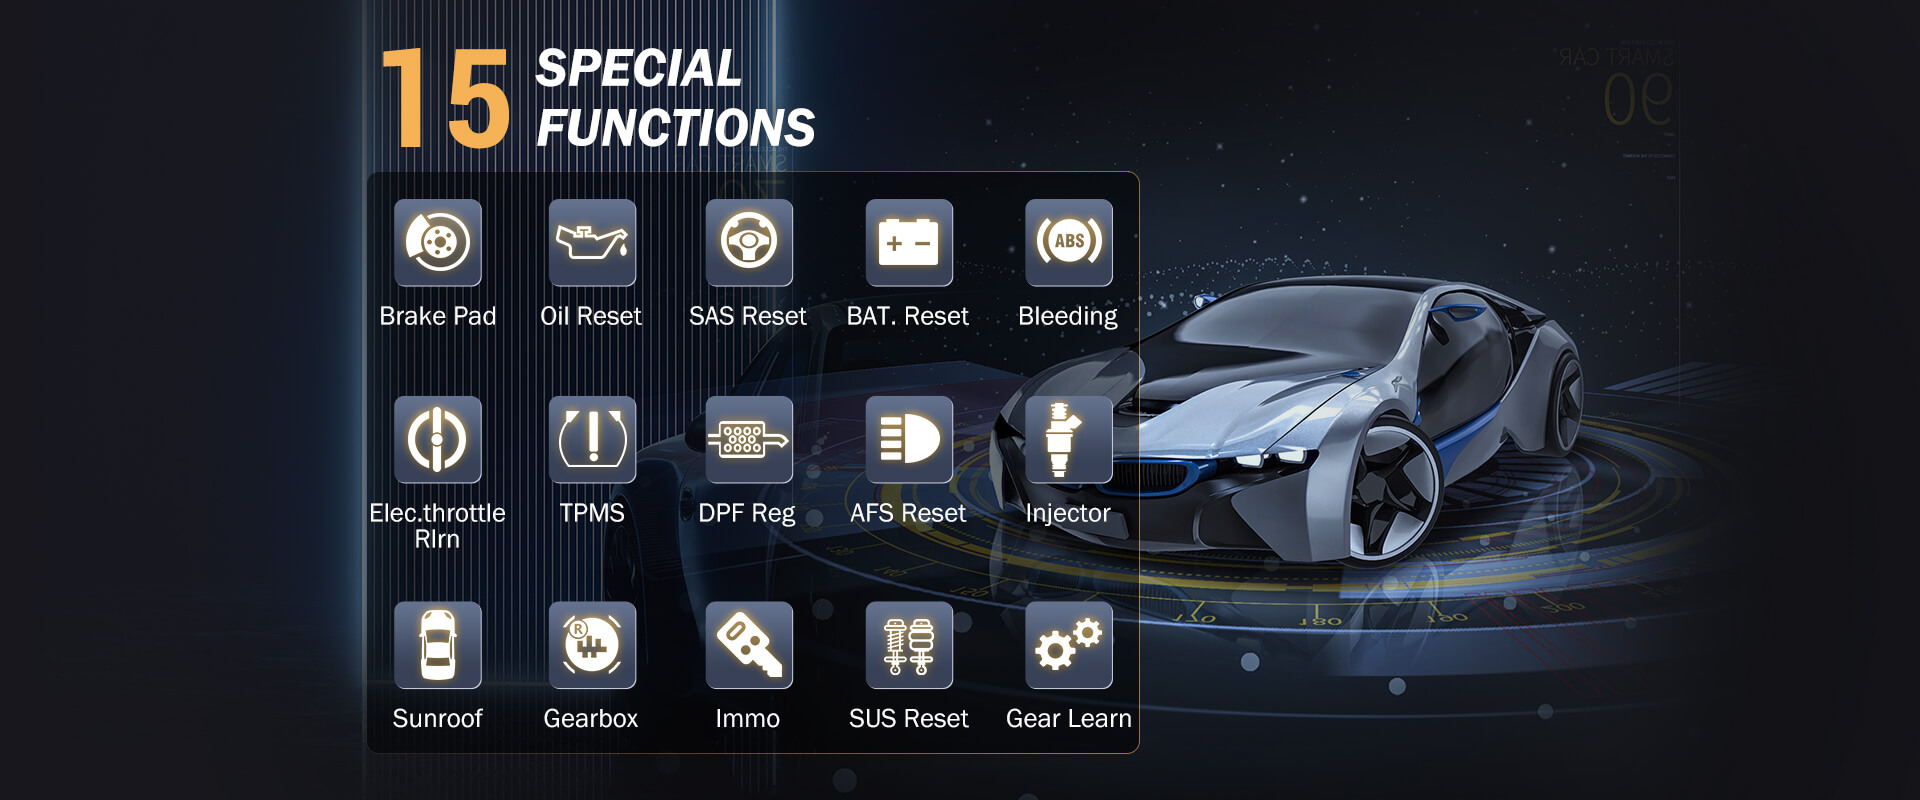 15 SPECIAL FUNCTIONS